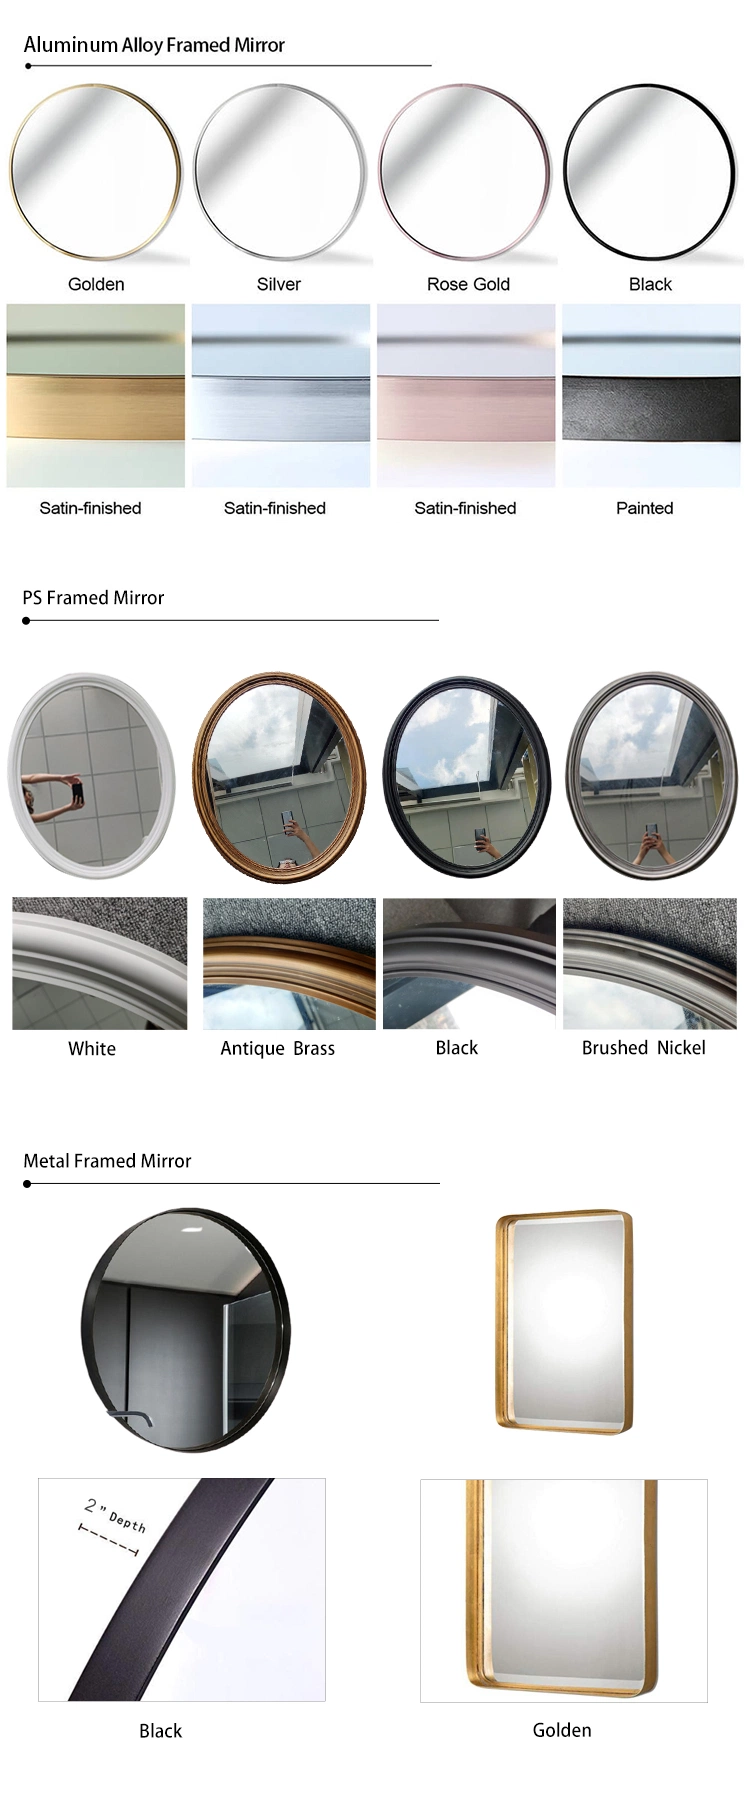 New Style Stainless Steel Aluminium Frame Mirror Designer Home Decorative Wall Mounted Framed Mirrors